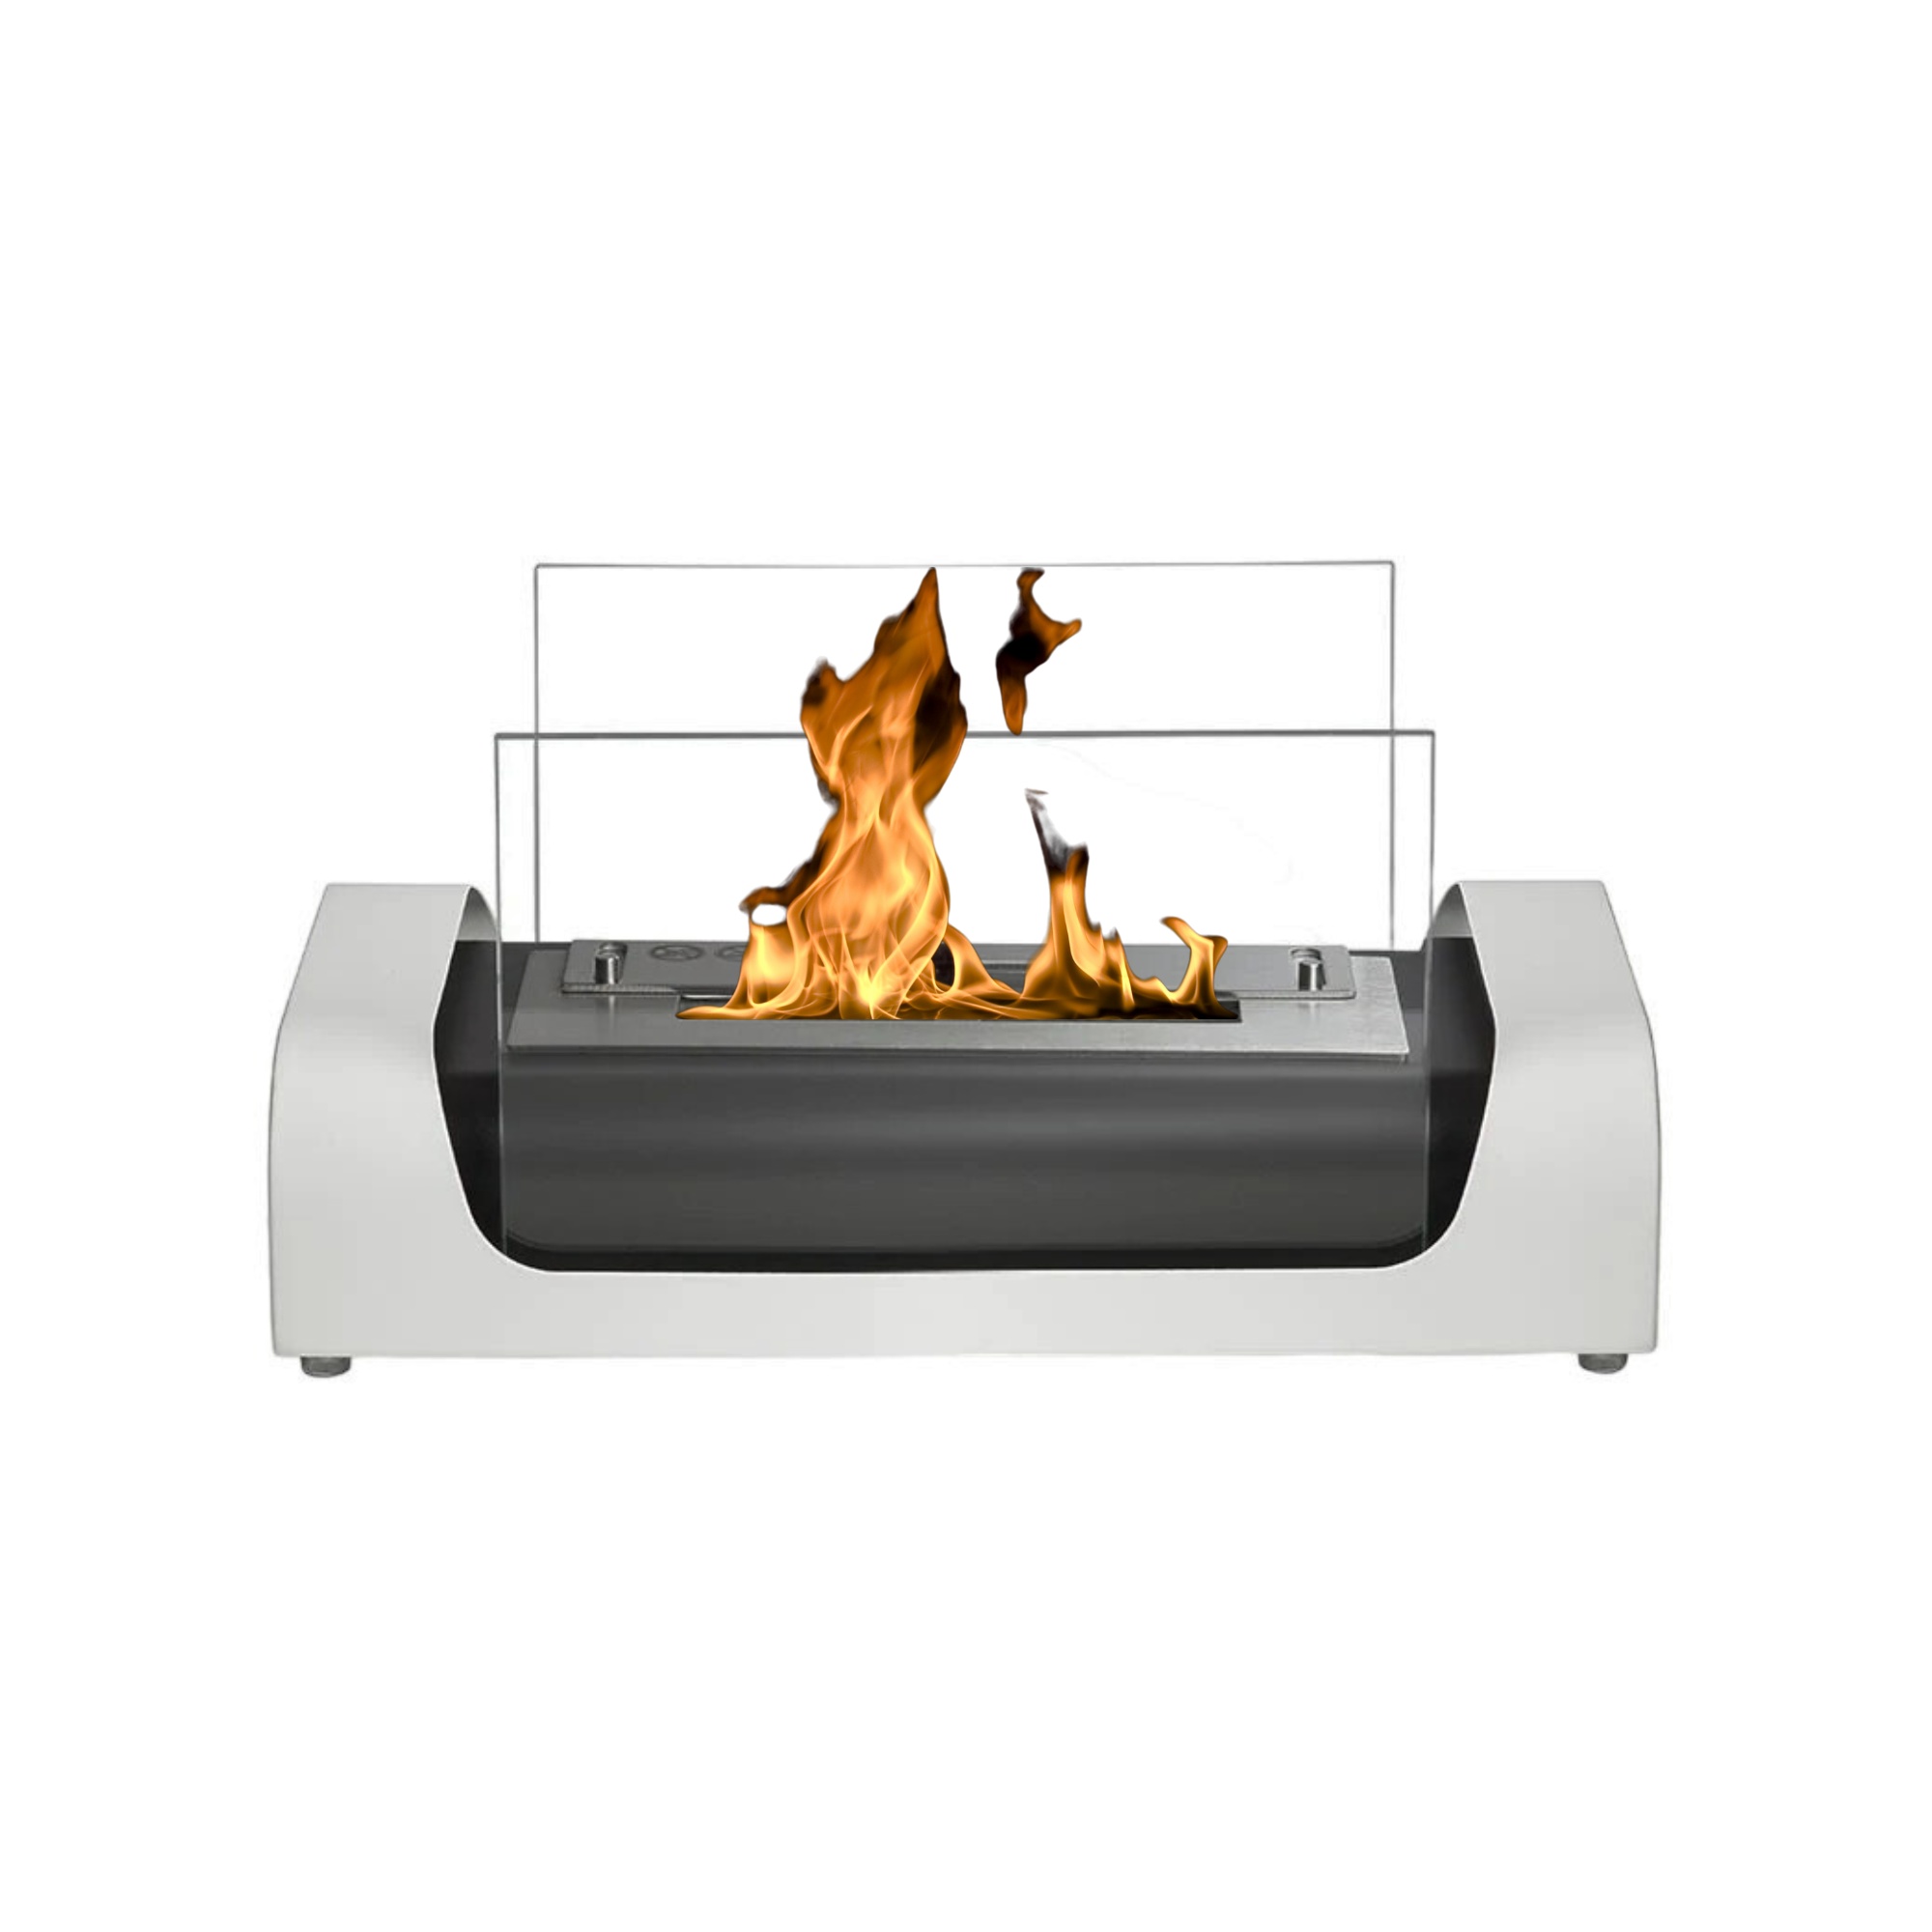 Bako Glossy White Table Fireplace